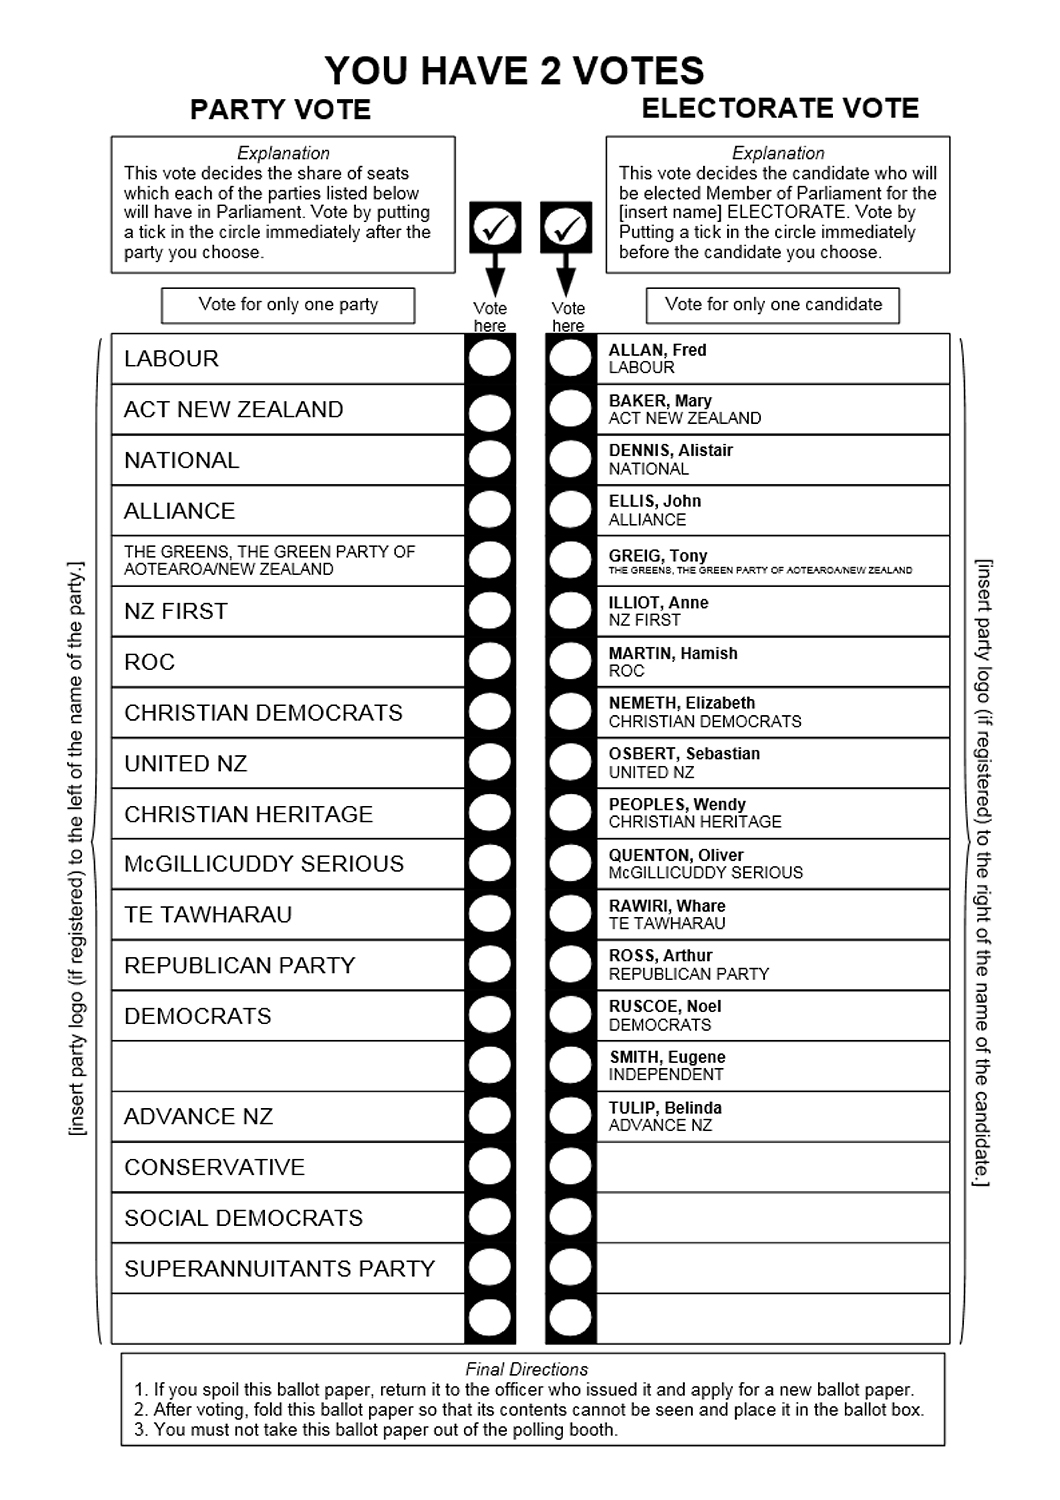 Sample ballot paper from a New Zealand national election, with parties listed on the left and candidates listed on the right.